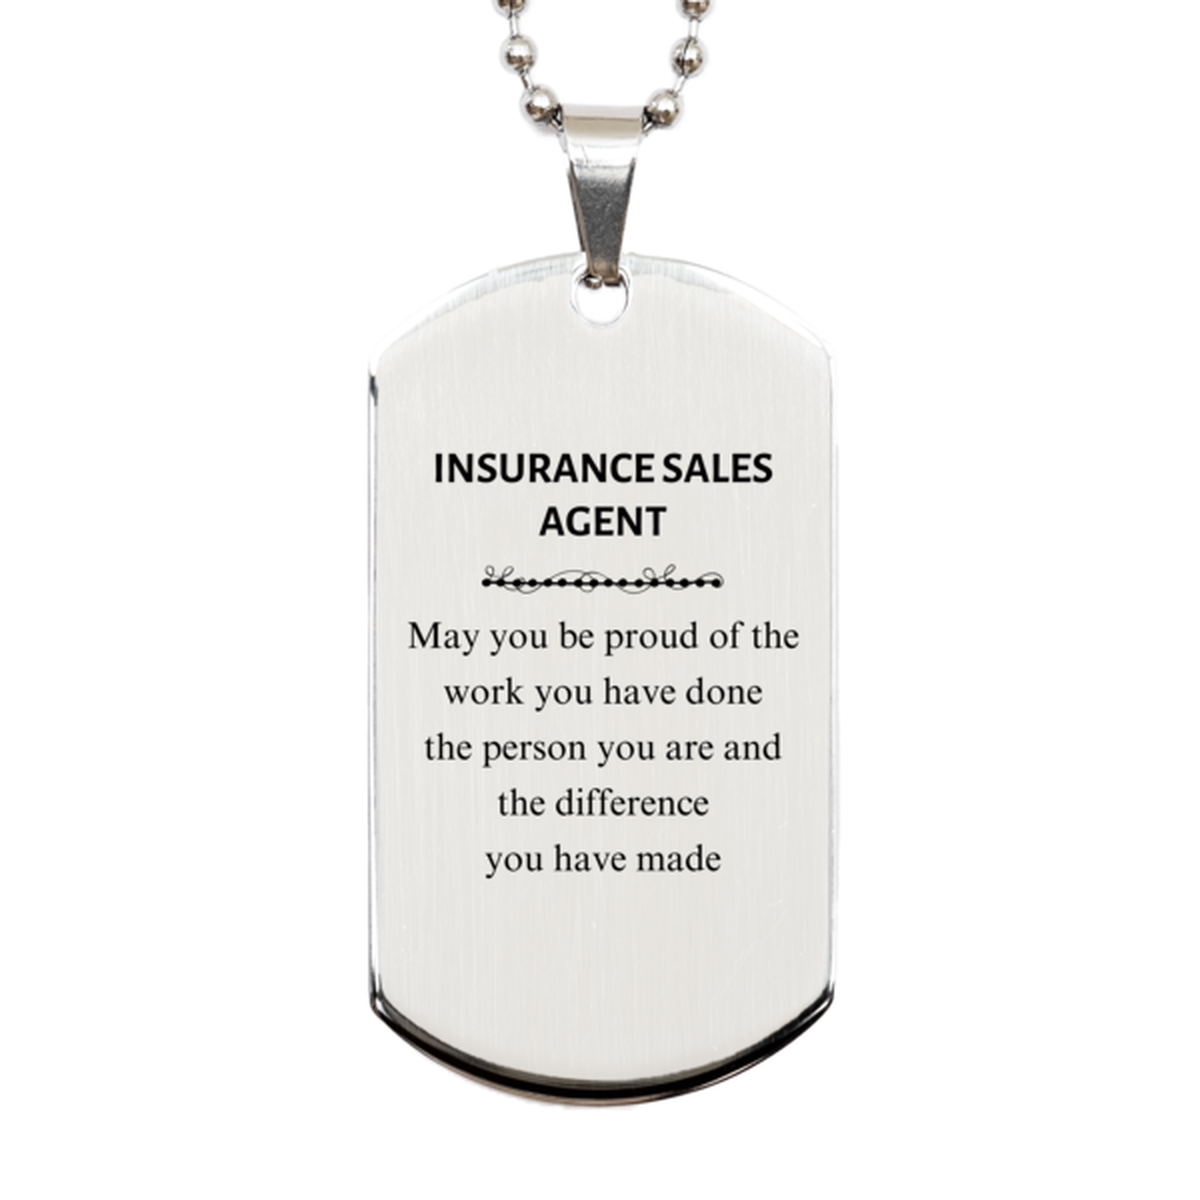 Insurance Sales Agent May you be proud of the work you have done, Retirement Insurance Sales Agent Silver Dog Tag for Colleague Appreciation Gifts Amazing for Insurance Sales Agent